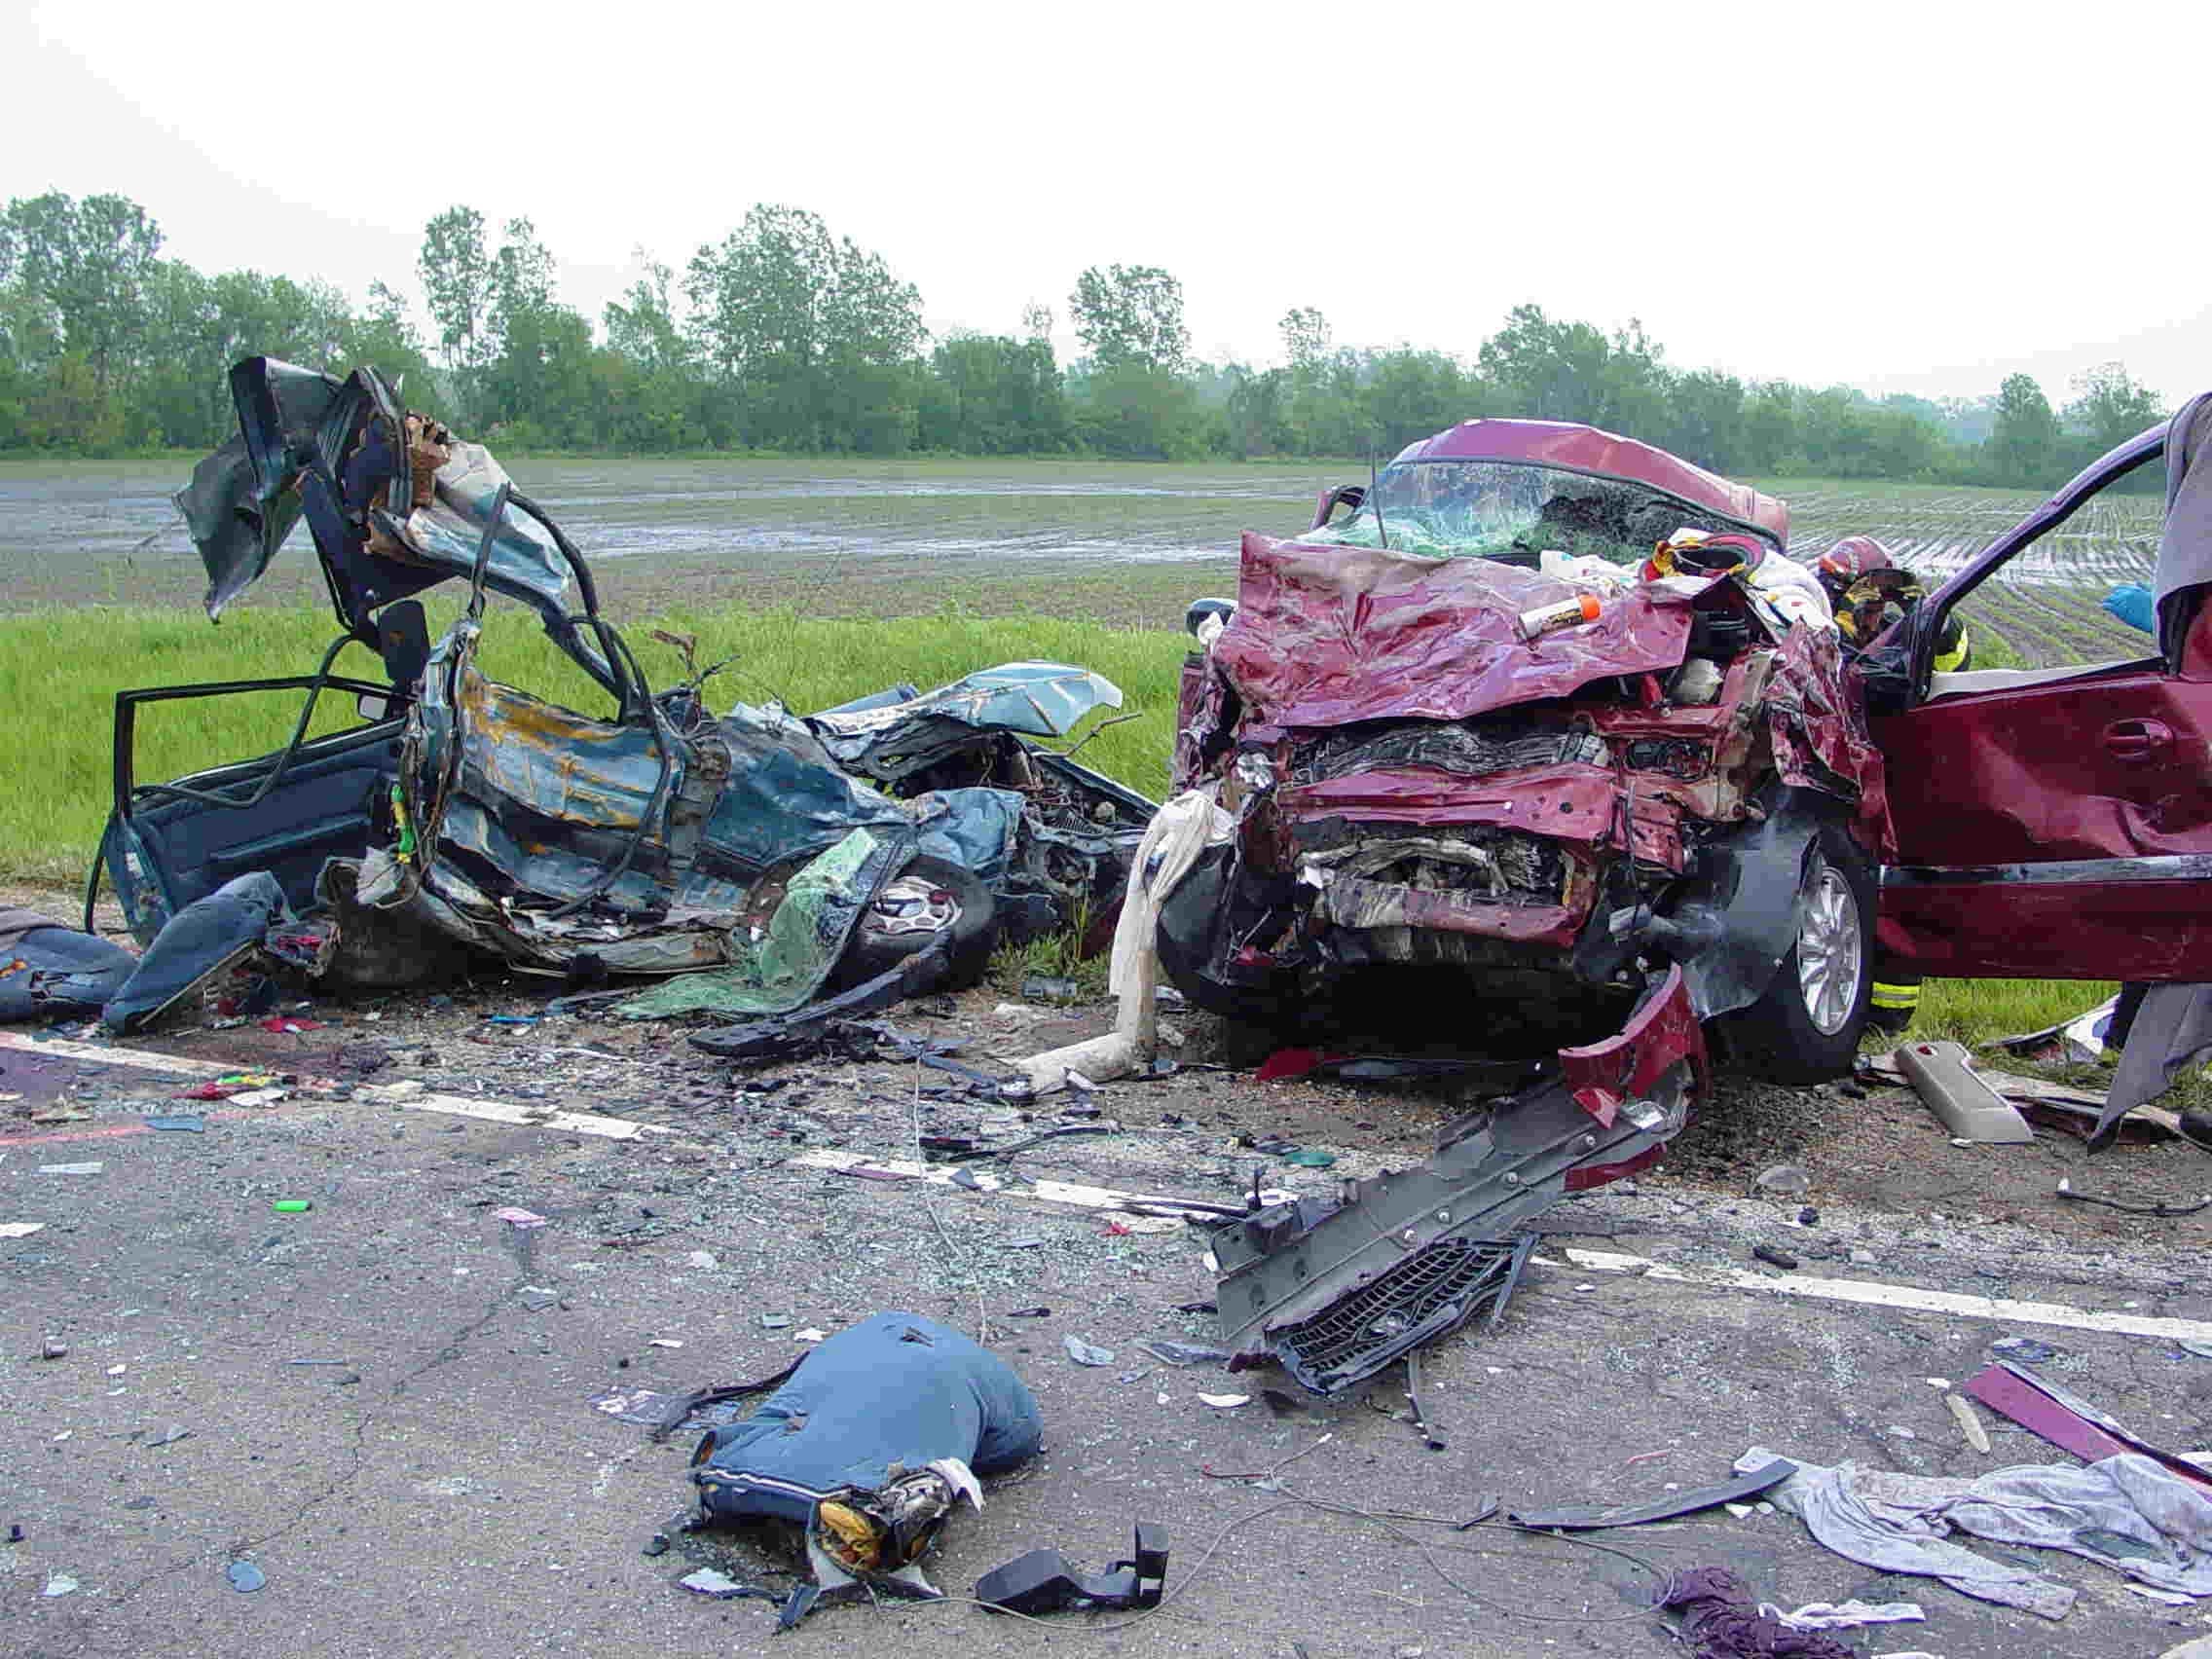 You are 1,048 times more likely to die from a car accident.